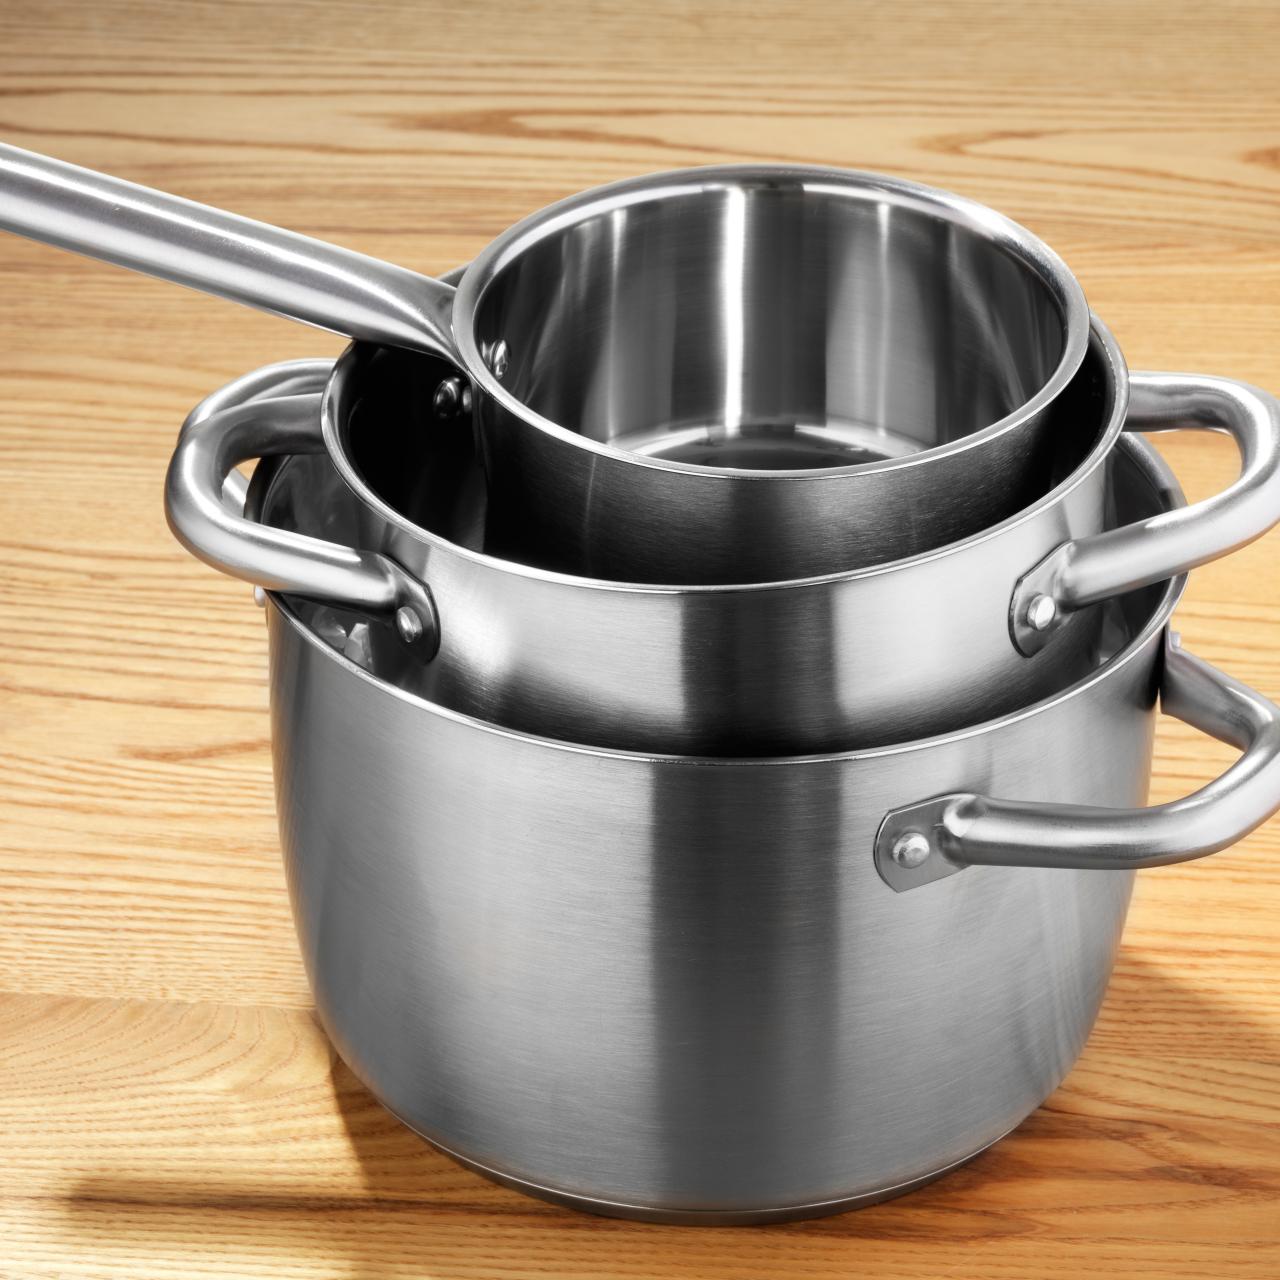 cookware - How to repair a pot with rusted screw on handle